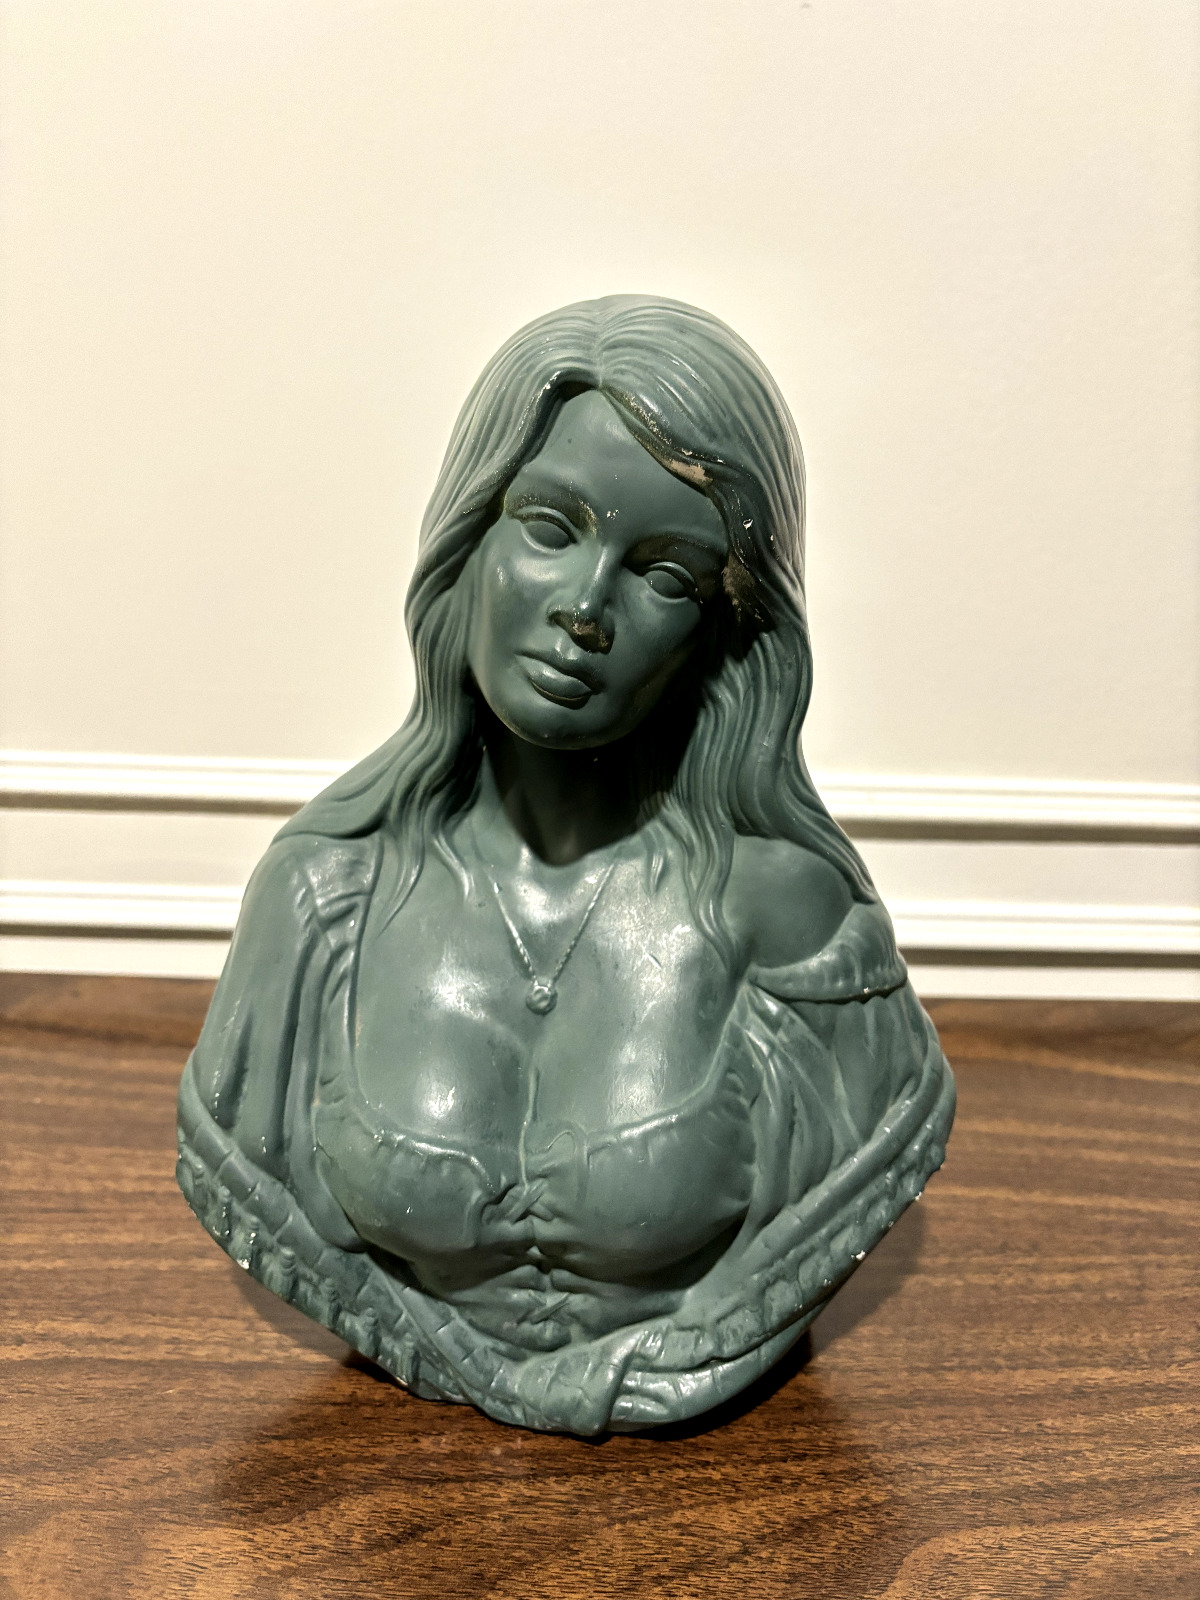 Un-Labeled Decorative Bust of a Woman in the Color Green